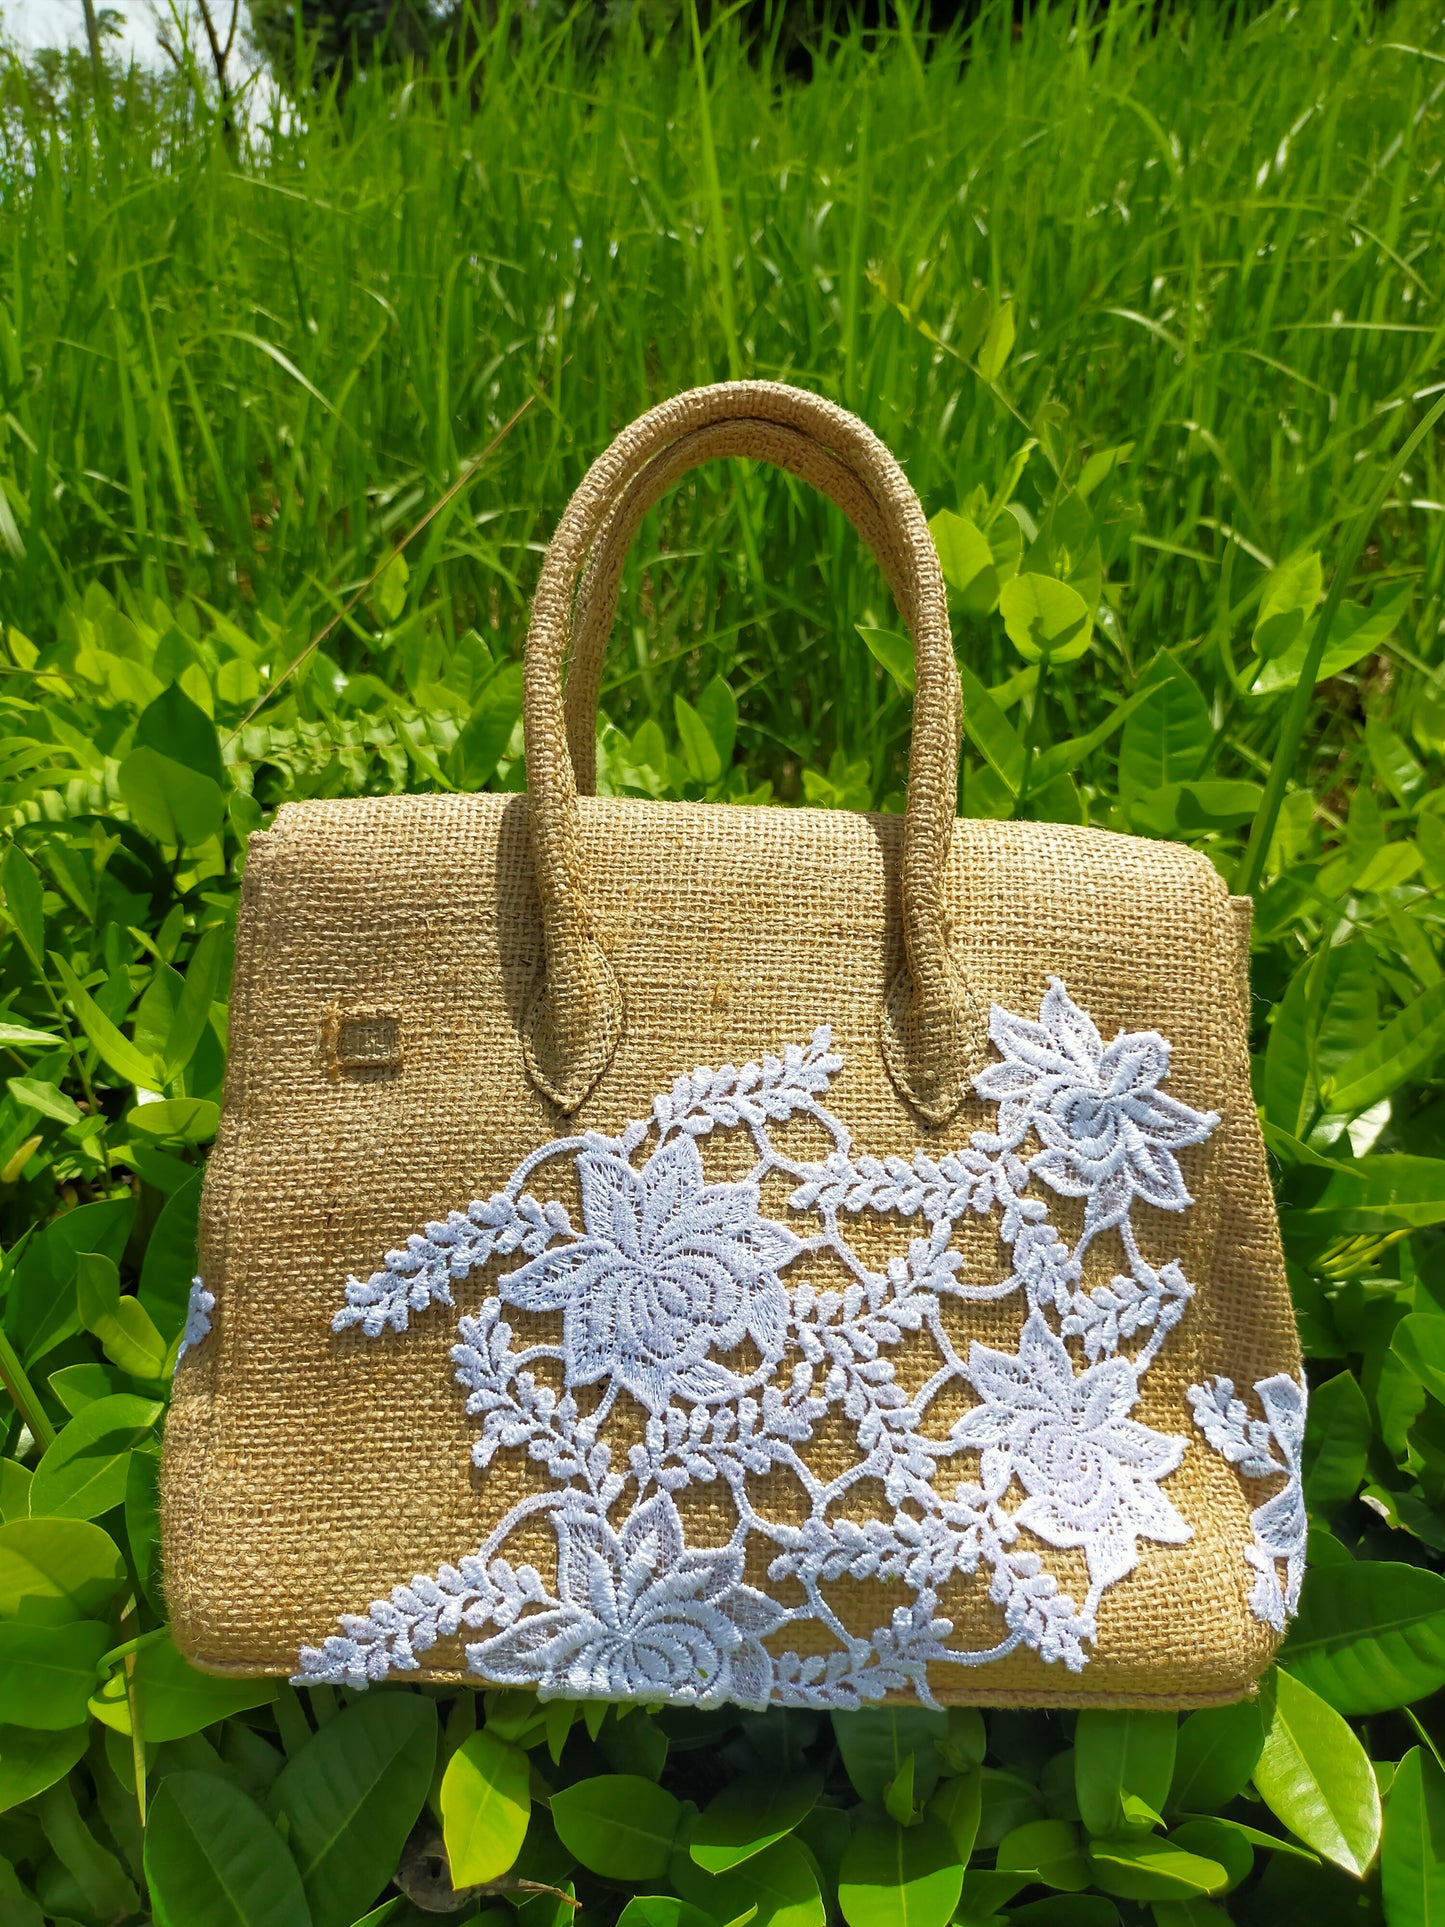 Handmade burlap / jute bag, Small size (25cm)_Limited edition_style 21